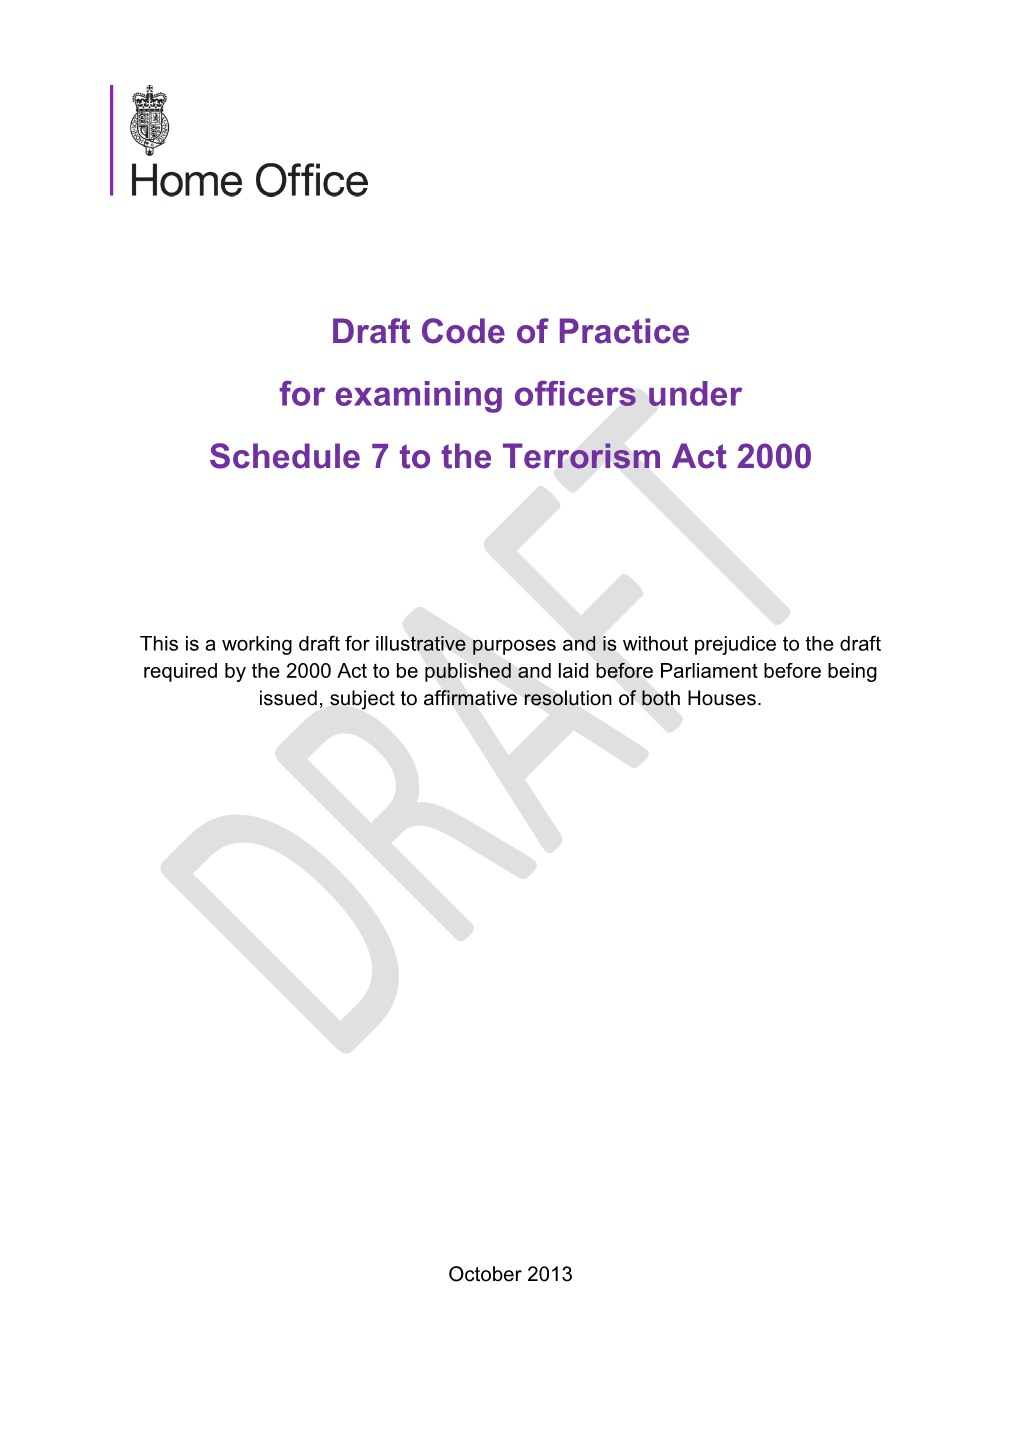 Draft Code of Practice for Examining Officers Under Schedule 7 to the Terrorism Act 2000